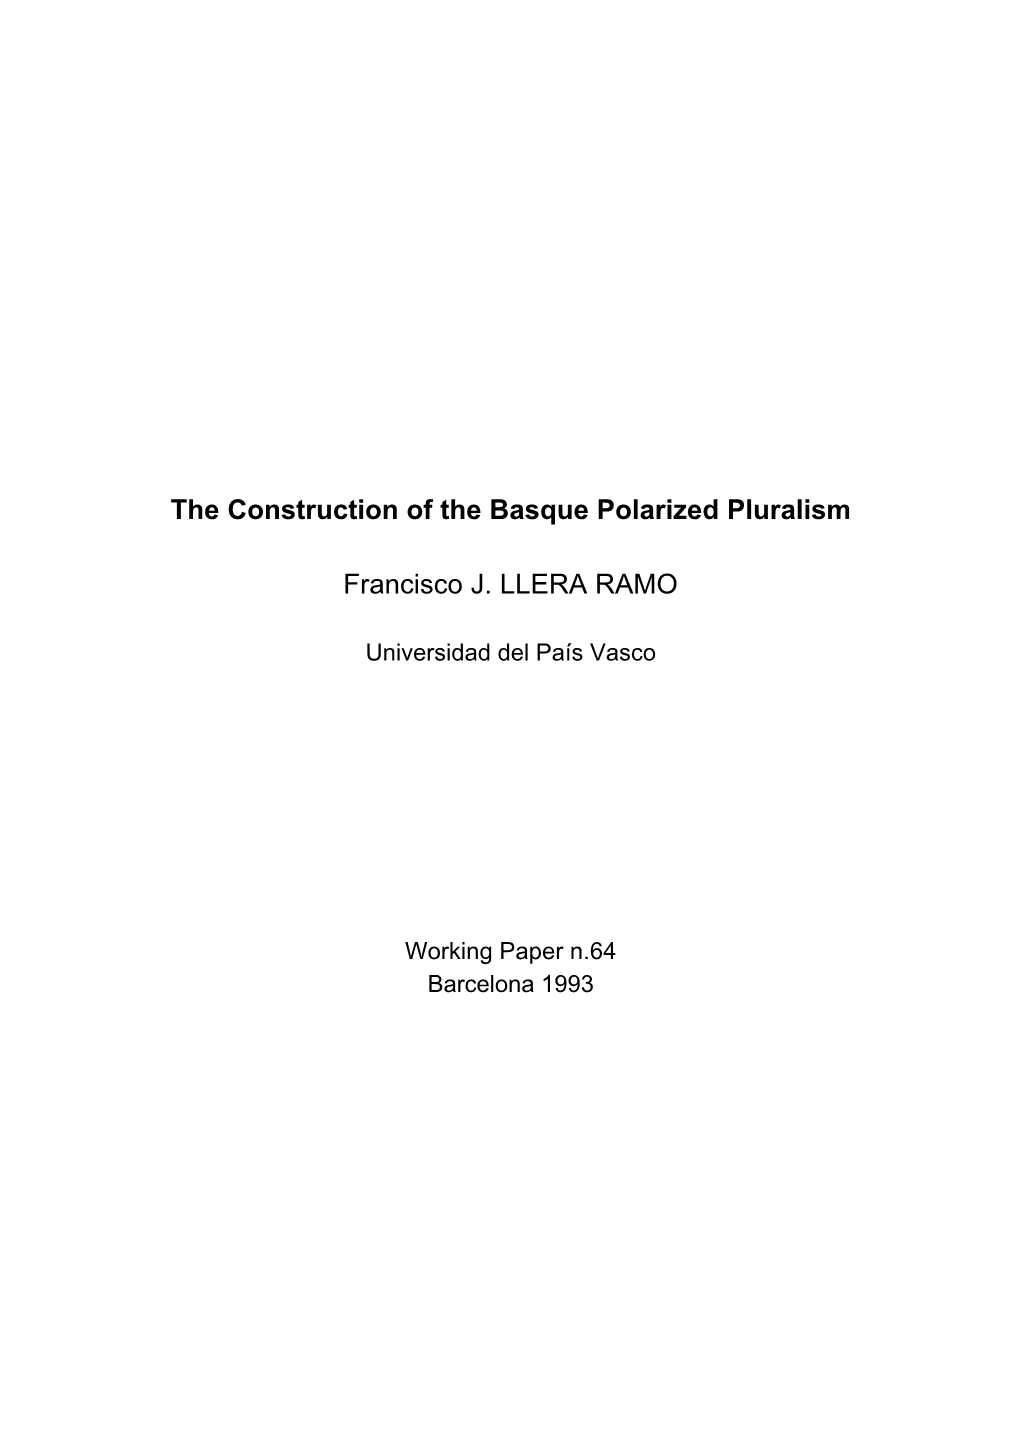 The Construction of the Basque Polarized Pluralism